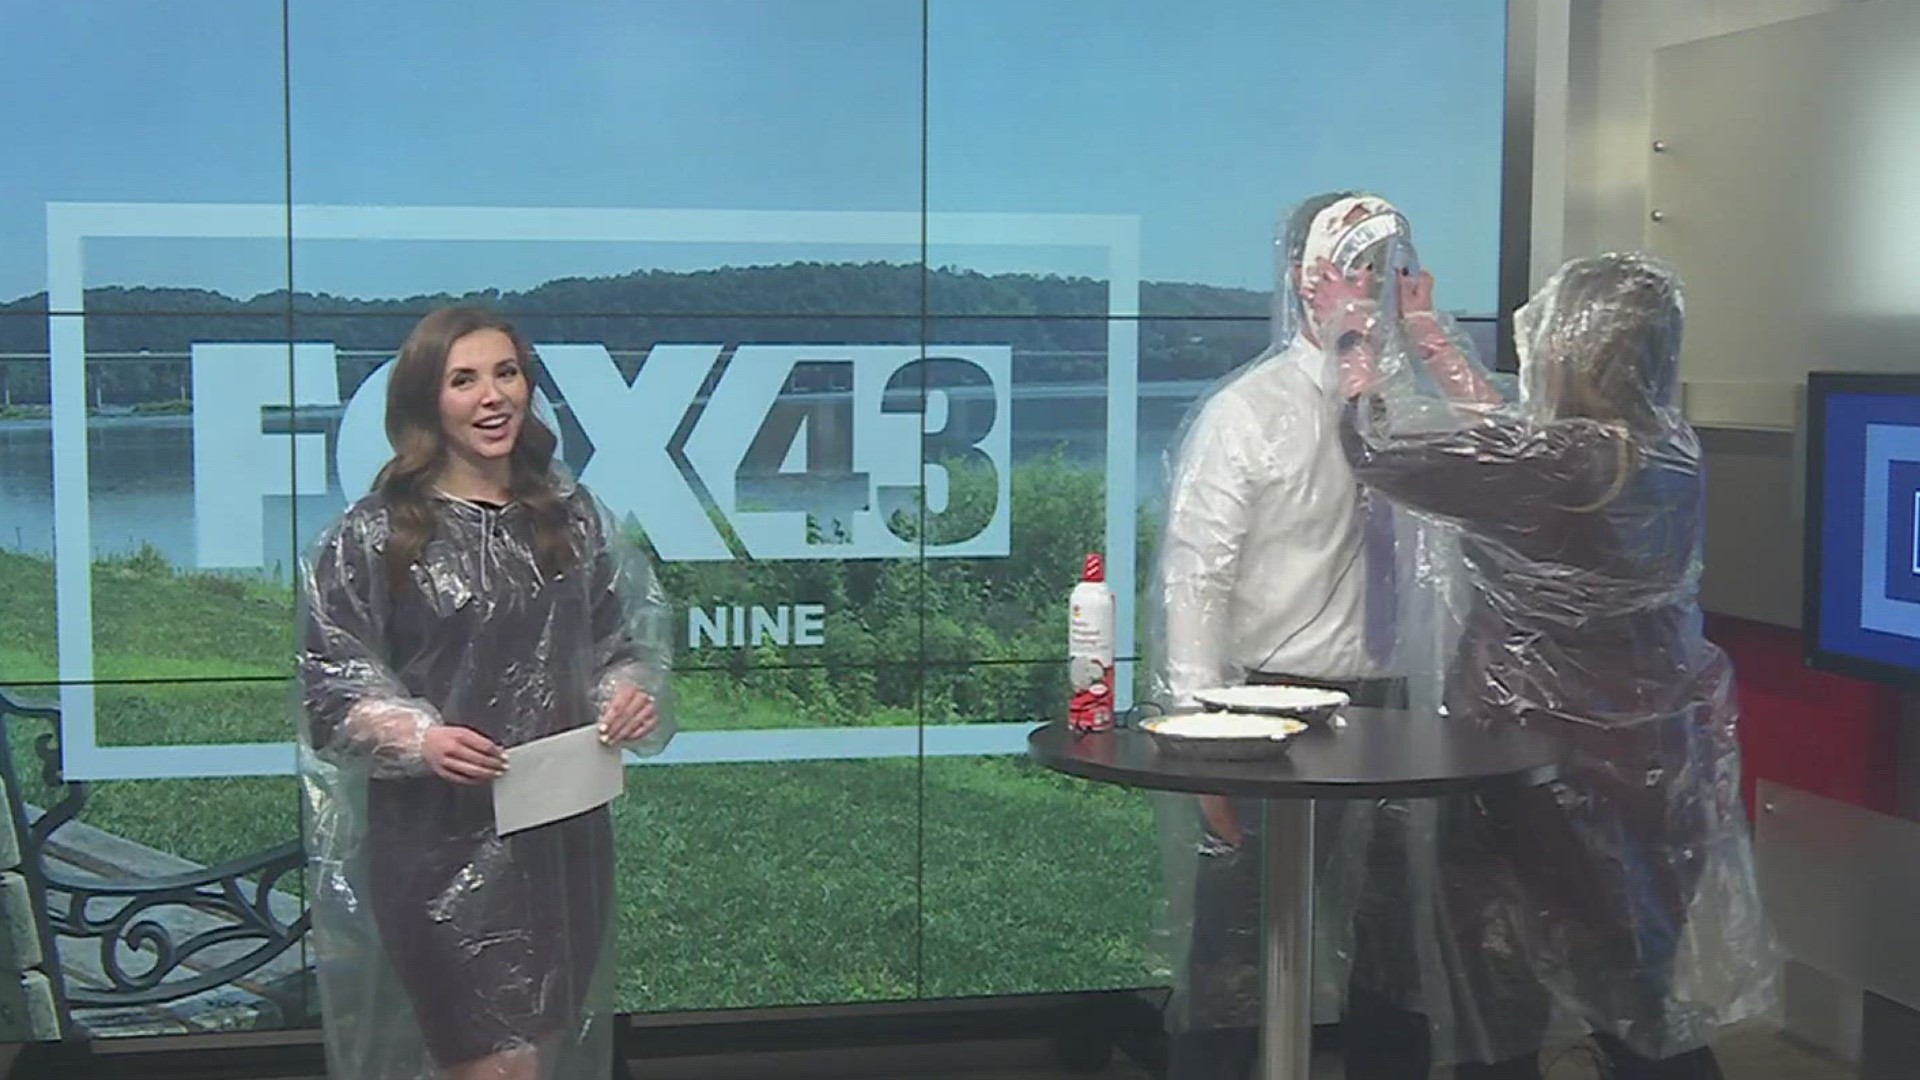 Jackie, Sean and Danielle tested their π knowledge with a trivia quiz. The loser got a special Pi Day surprise.